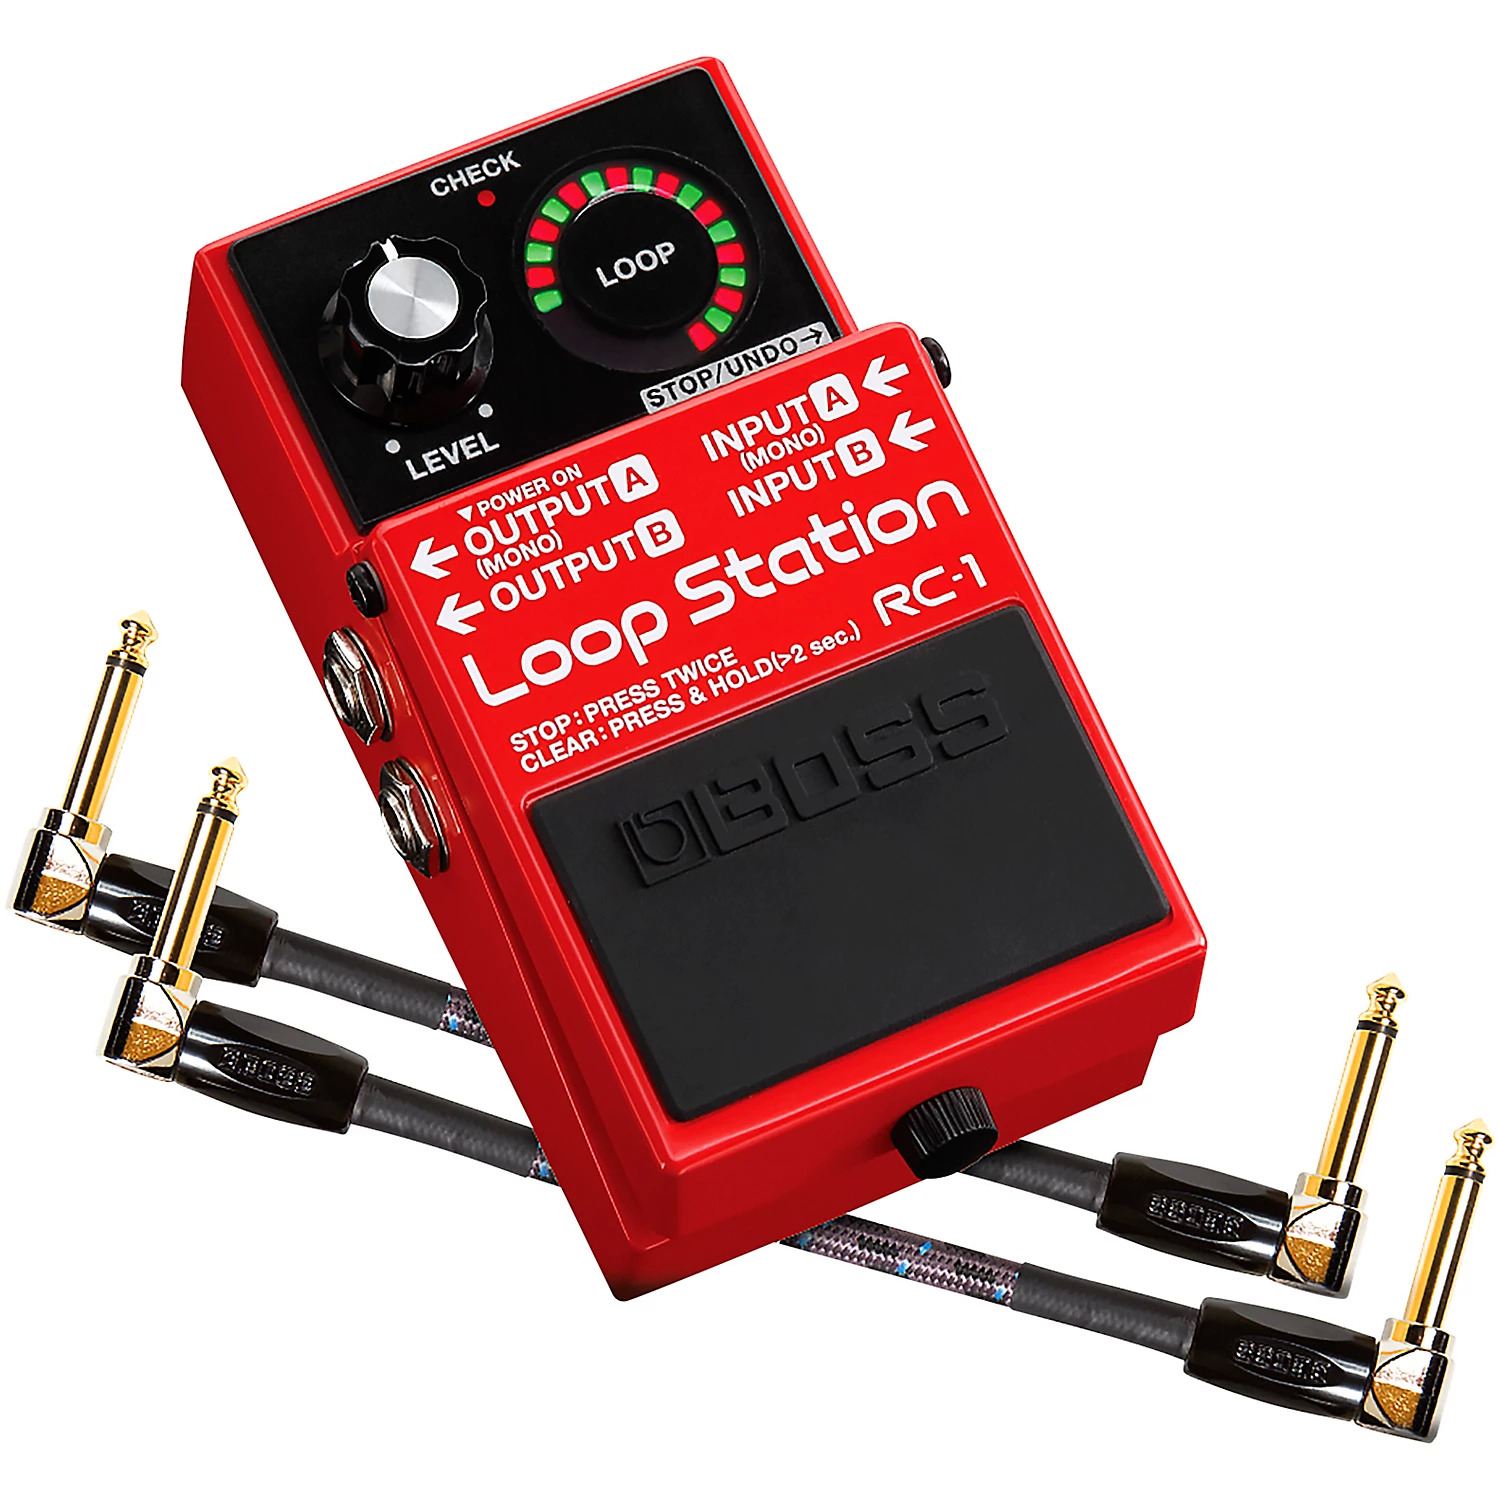 BOSS RC-1 Ultimate Looper Kit: Guitar Effects Pedal and Two 6" Patch Cables $99.99